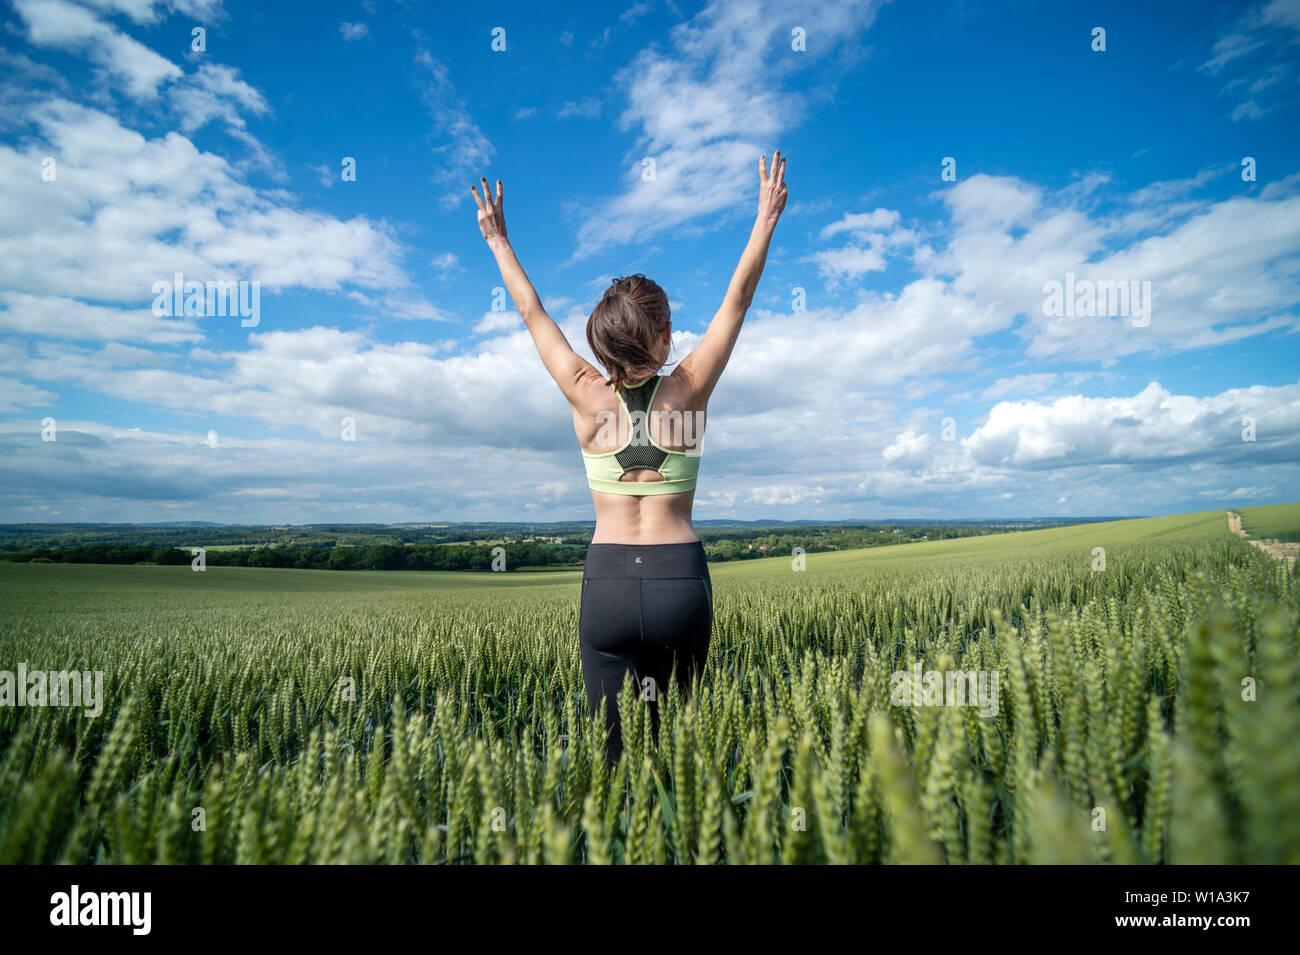 back view of a sportswoman with her arms raised, in a green wheat field. Stock Photo